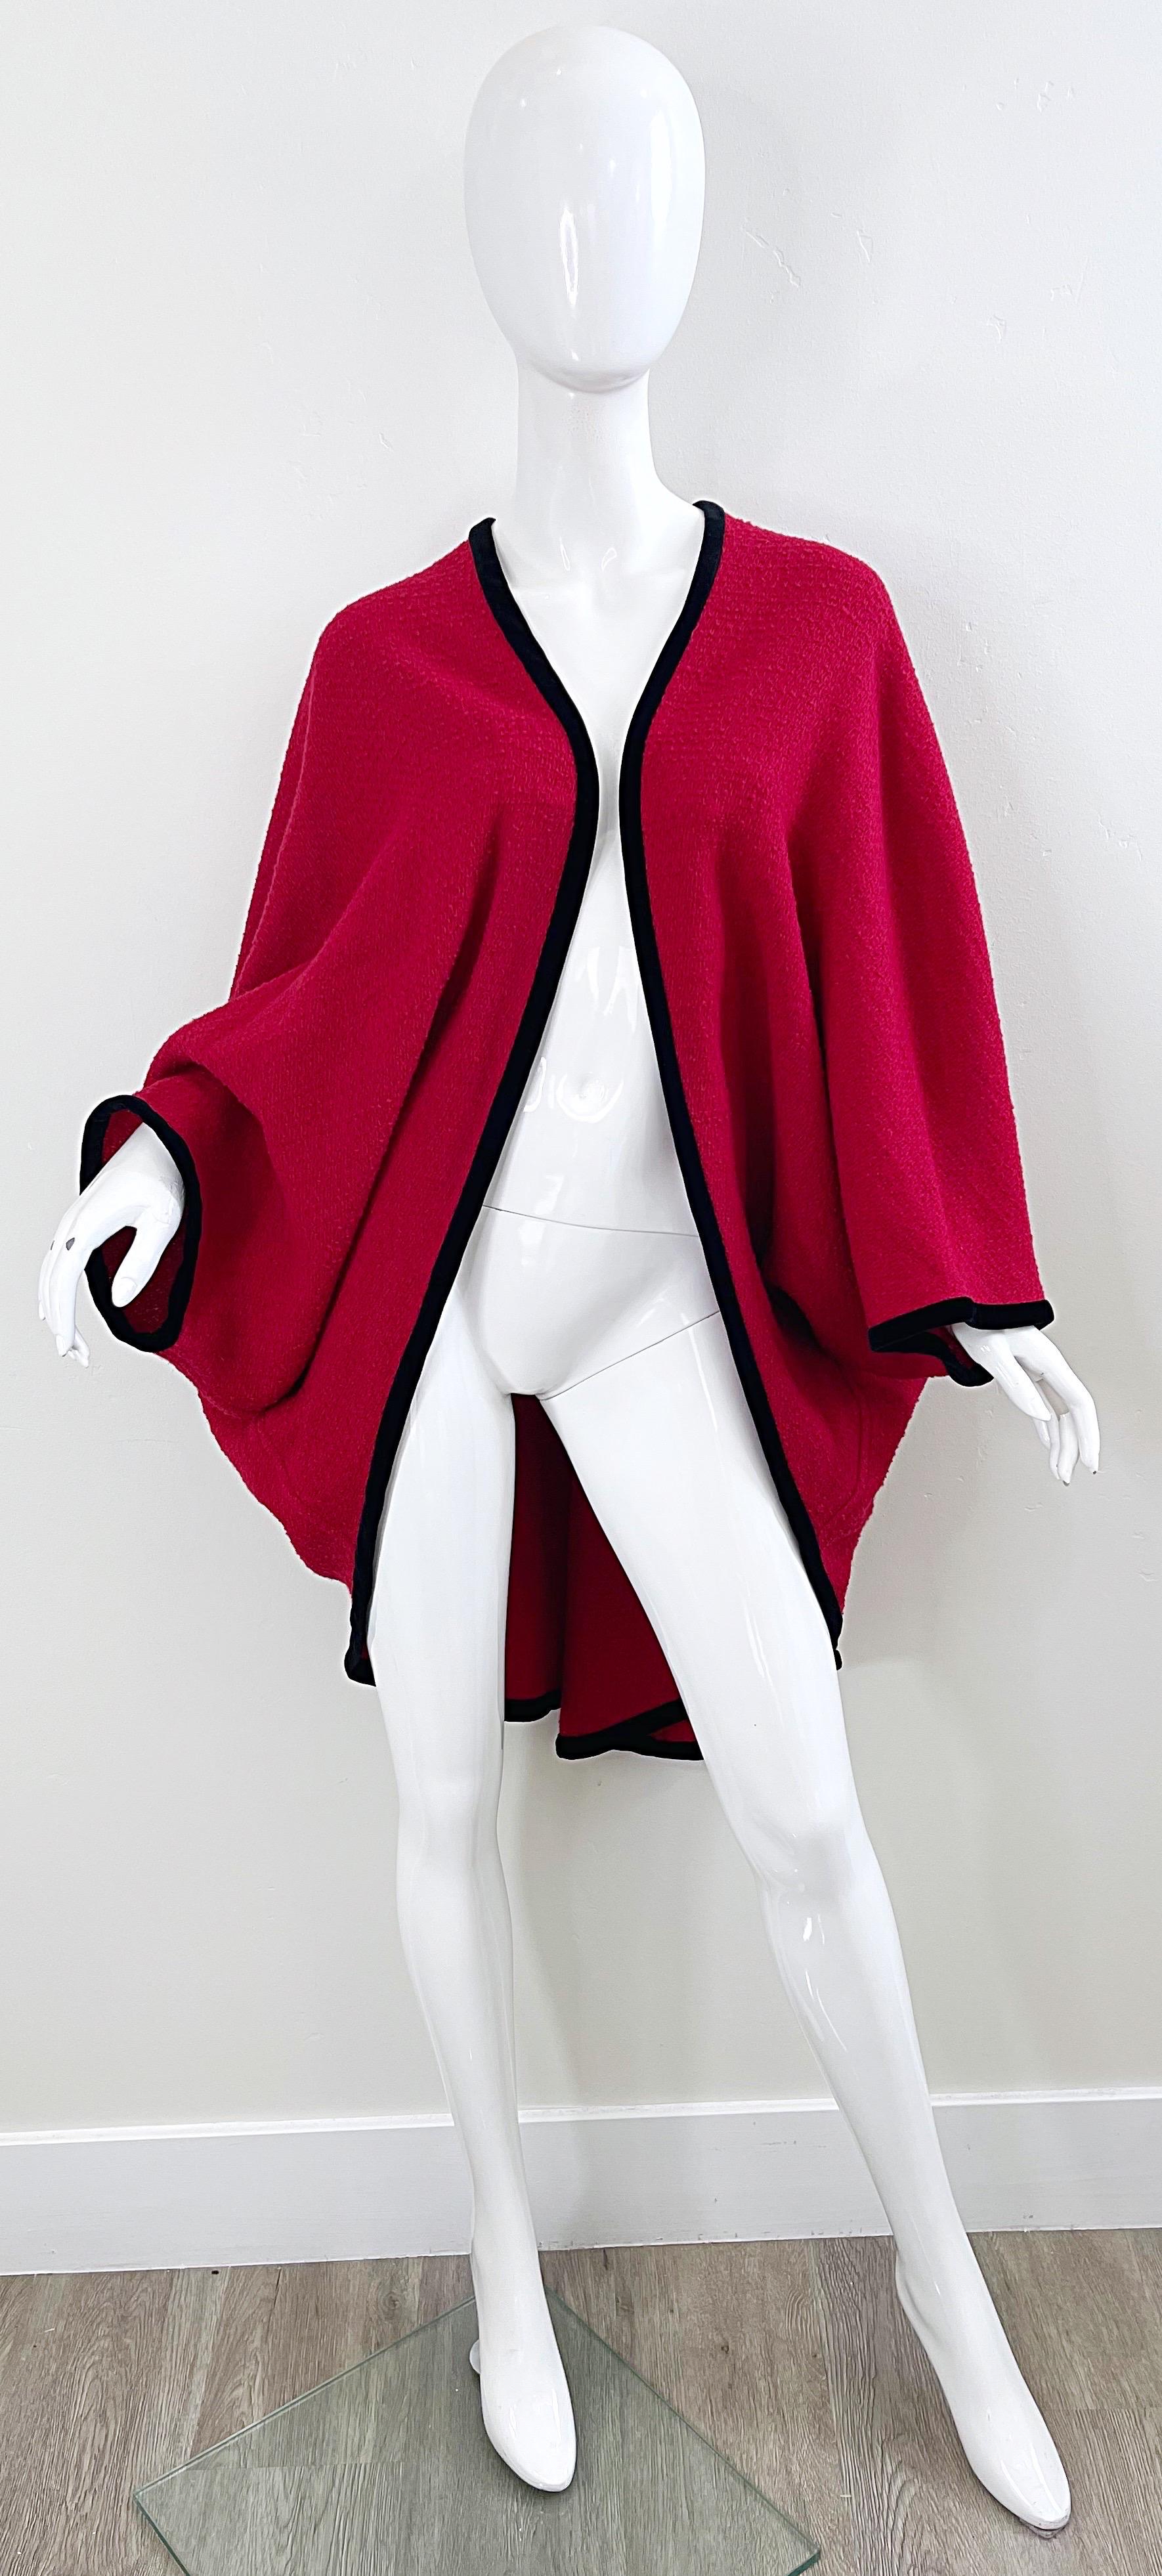 Karl Lagerfeld 1980s Lipstick Red Boiled Wool Cocoon Vintage Cape Kimono Jacket For Sale 8